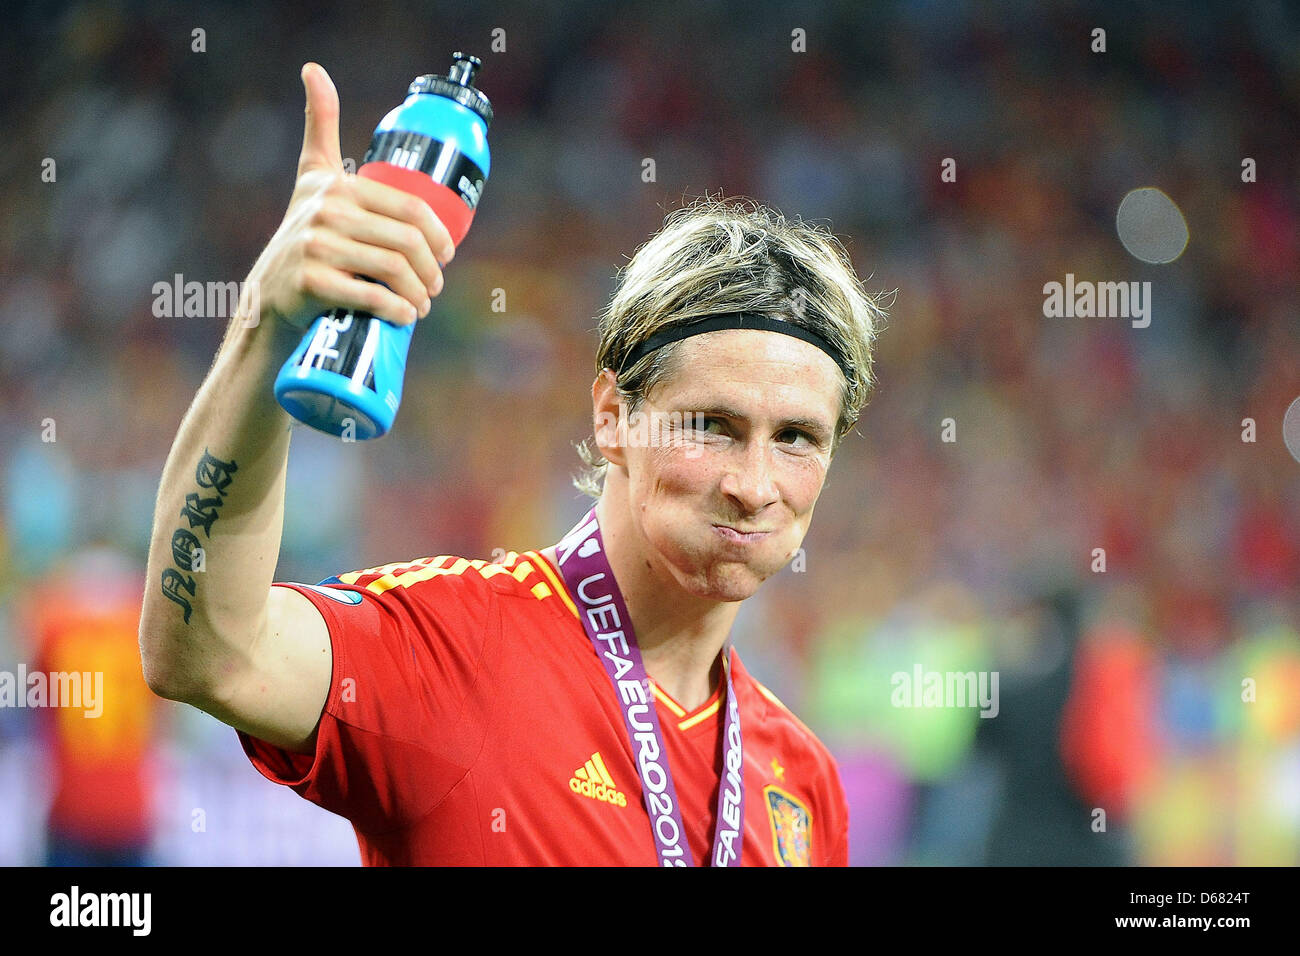 Spain's Fernando Torres is pictured during the UEFA EURO 2012 final soccer match Spain vs. Italy at the Olympic Stadium in Kiev, Ukraine, 01 July 2012. Photo: Revierfoto Stock Photo